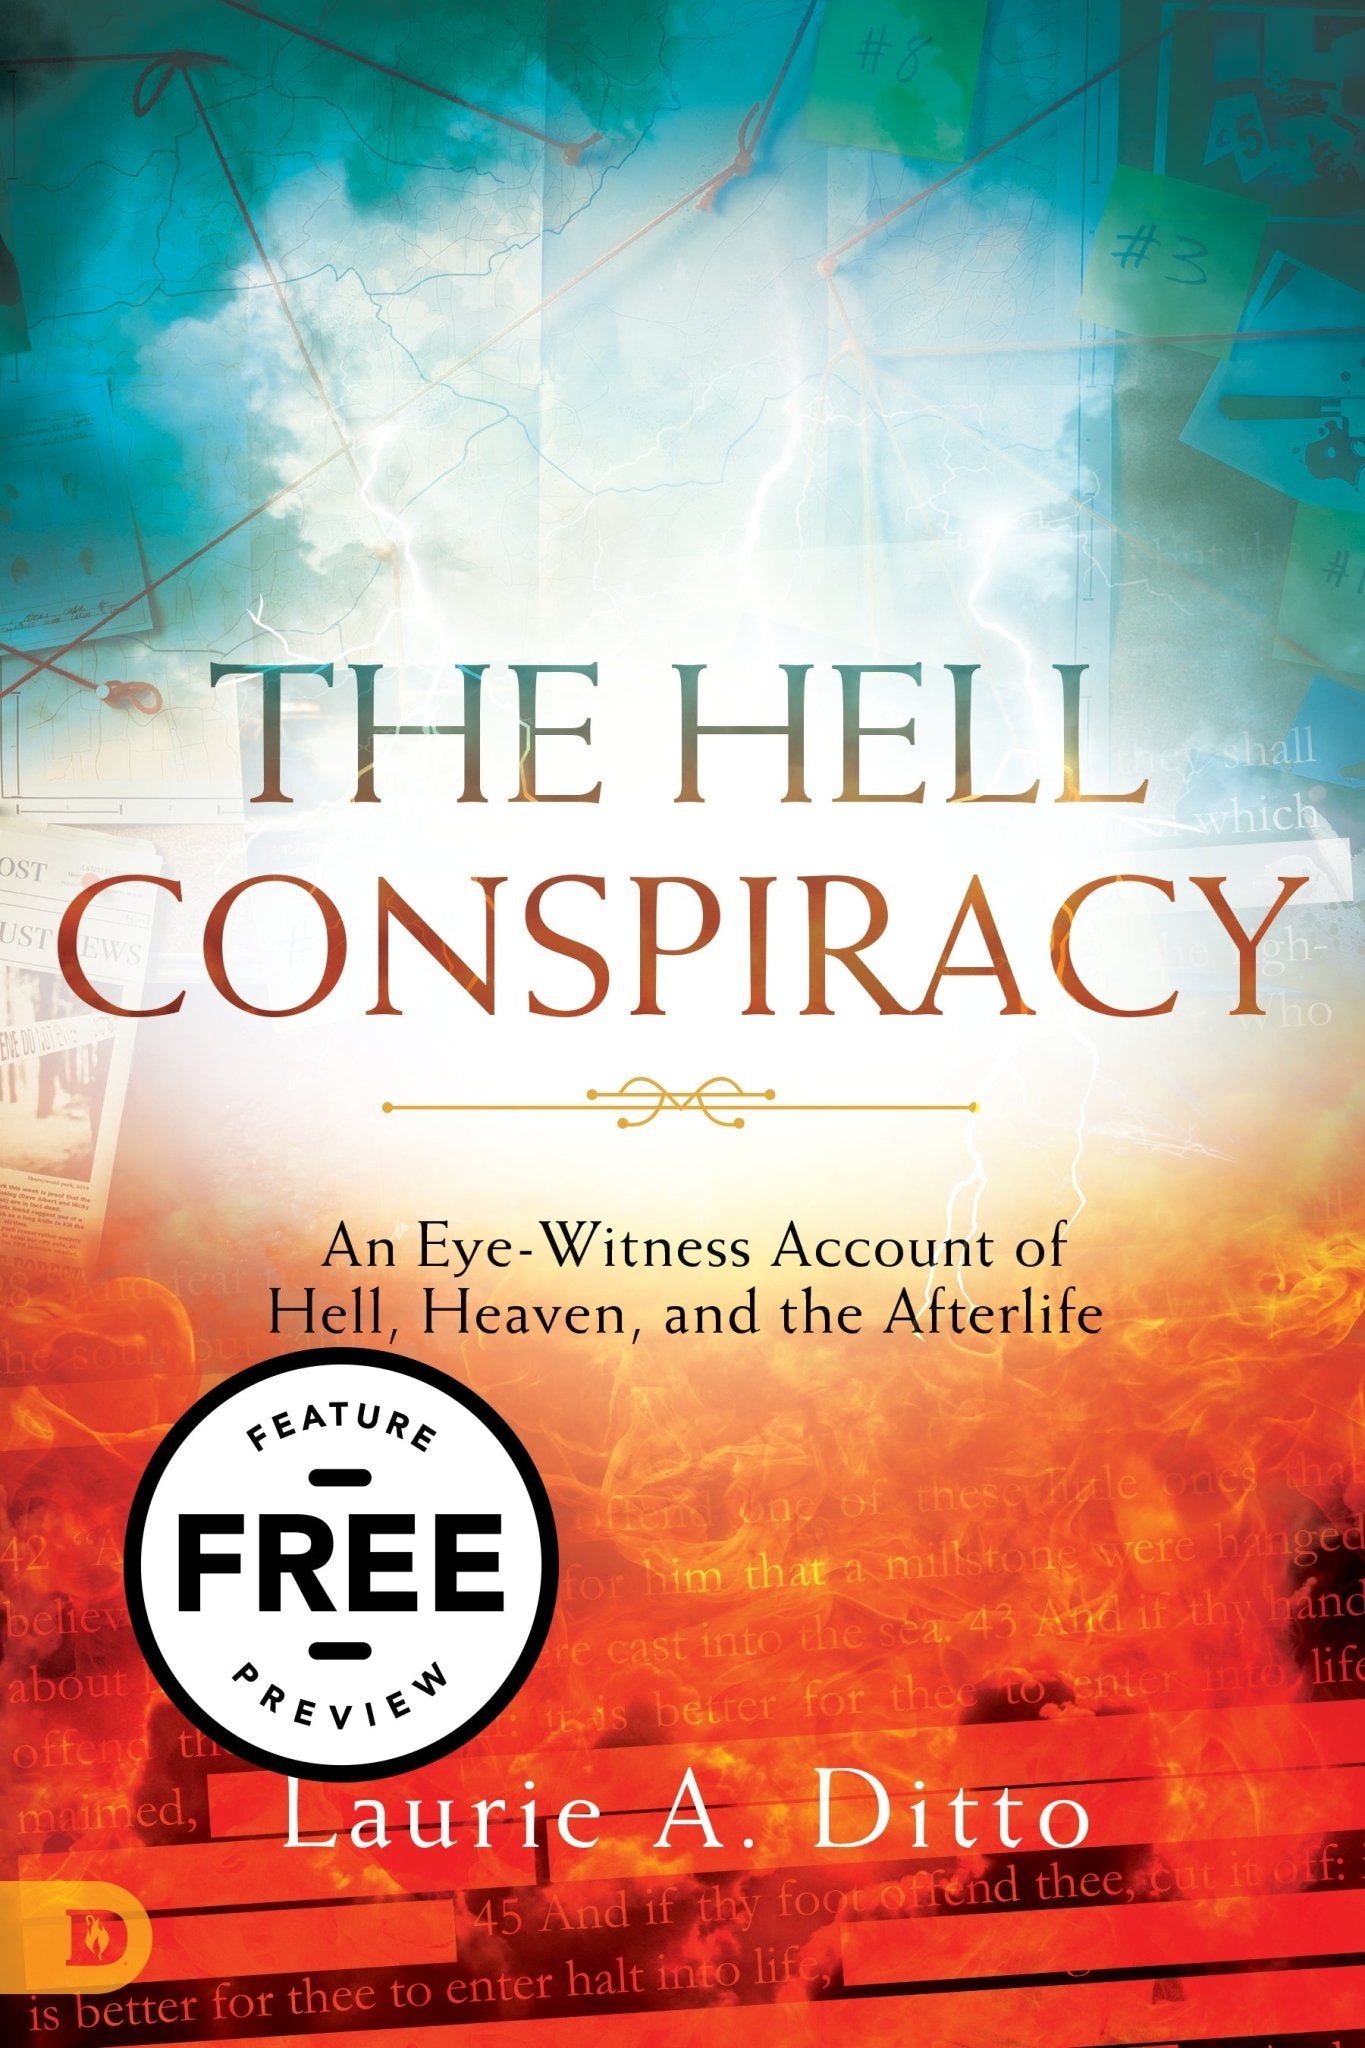 The Hell Conspiracy Free Feature Message (PDF Download)